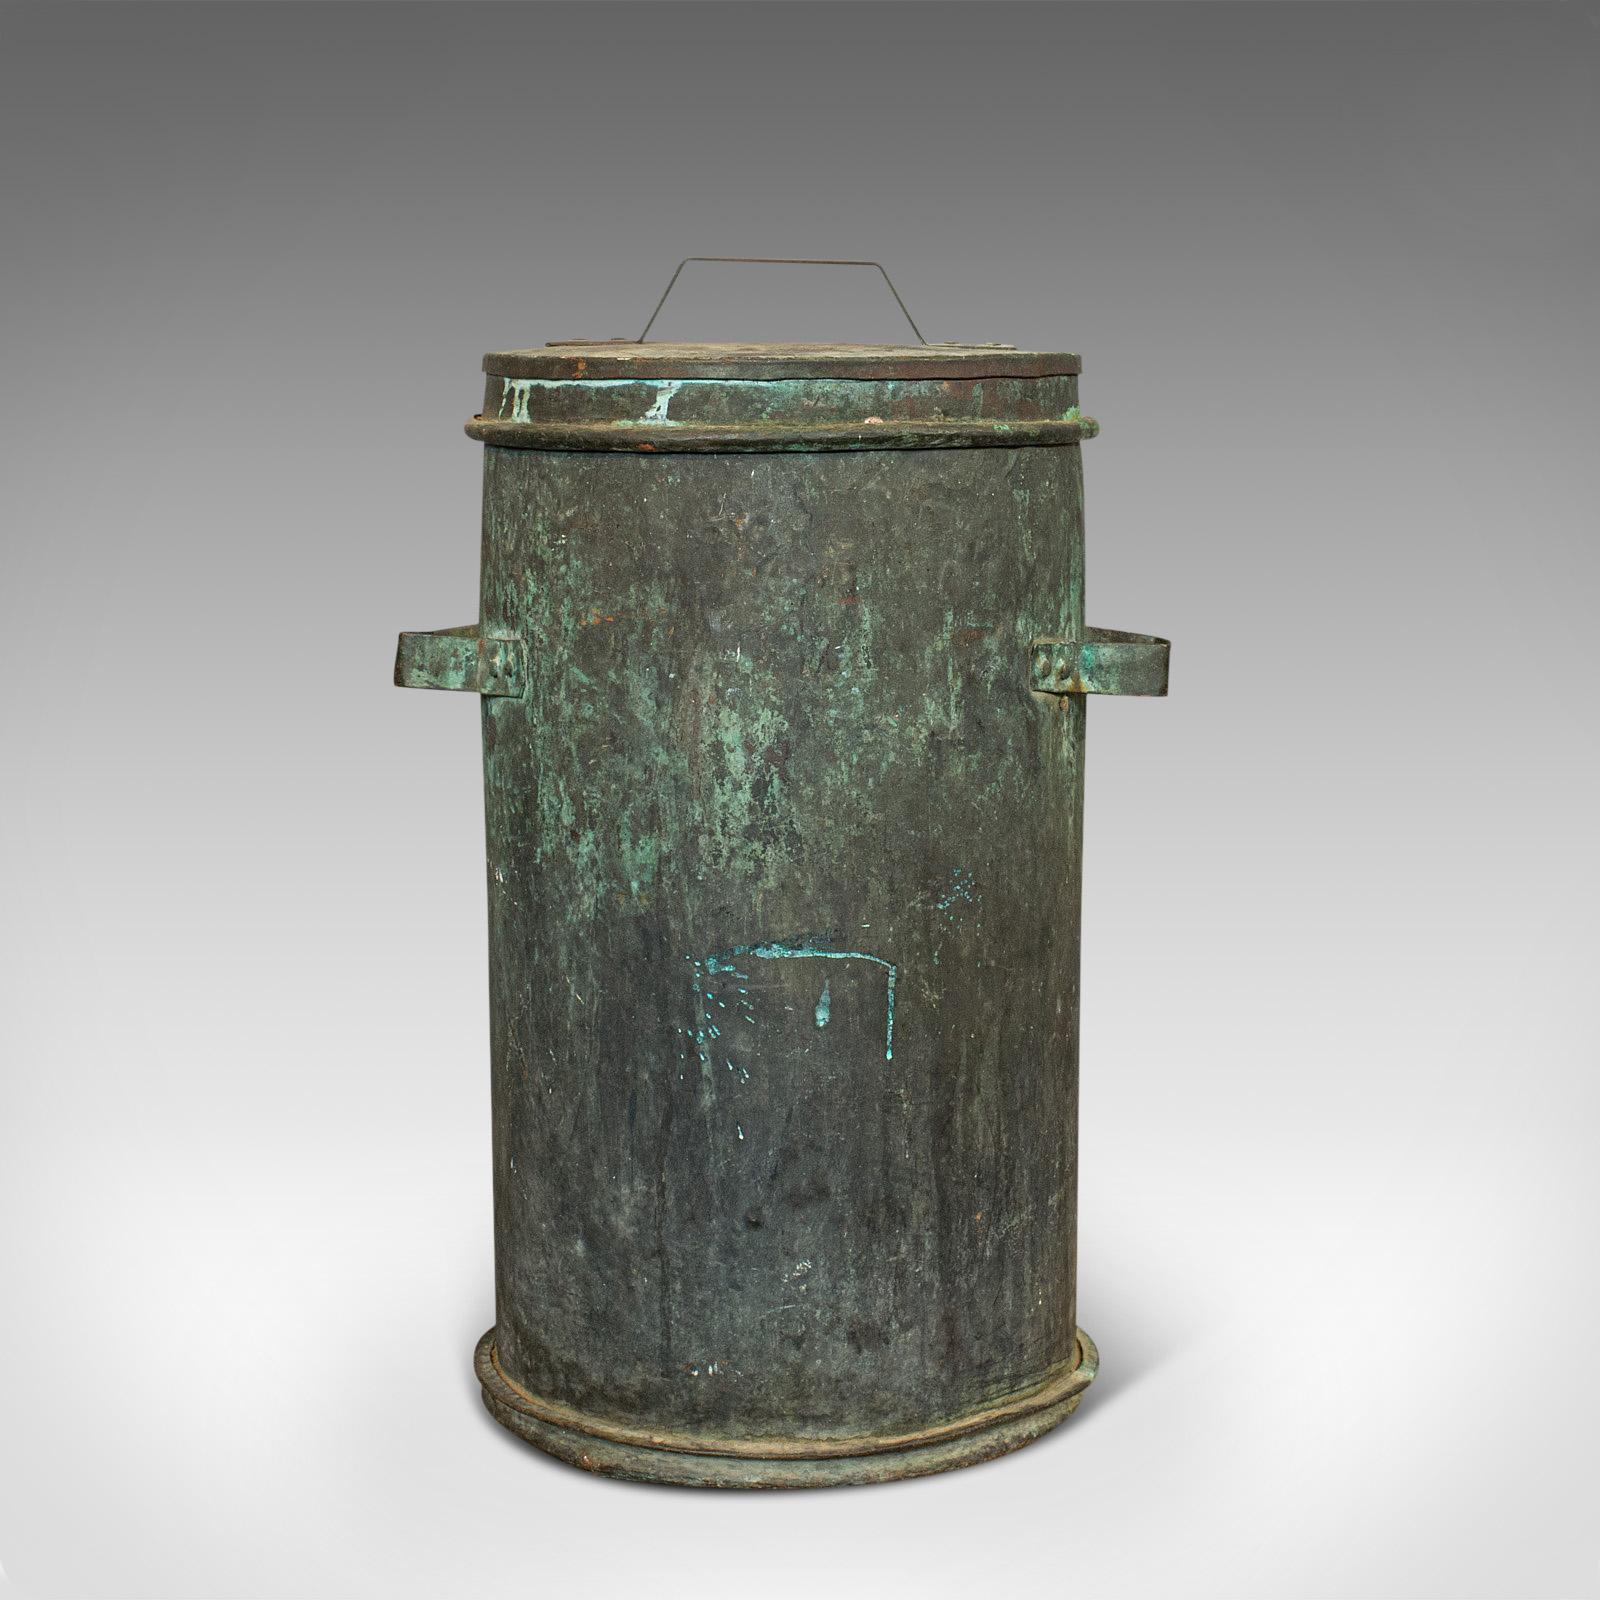 This is an antique grain bin. A French, copper farmhouse silo or fireside bucket, dating to the late Victorian period, circa 1890.

Superb French antique
Displays a desirable aged patina
Copper shows delightful weathering with eye-catching green